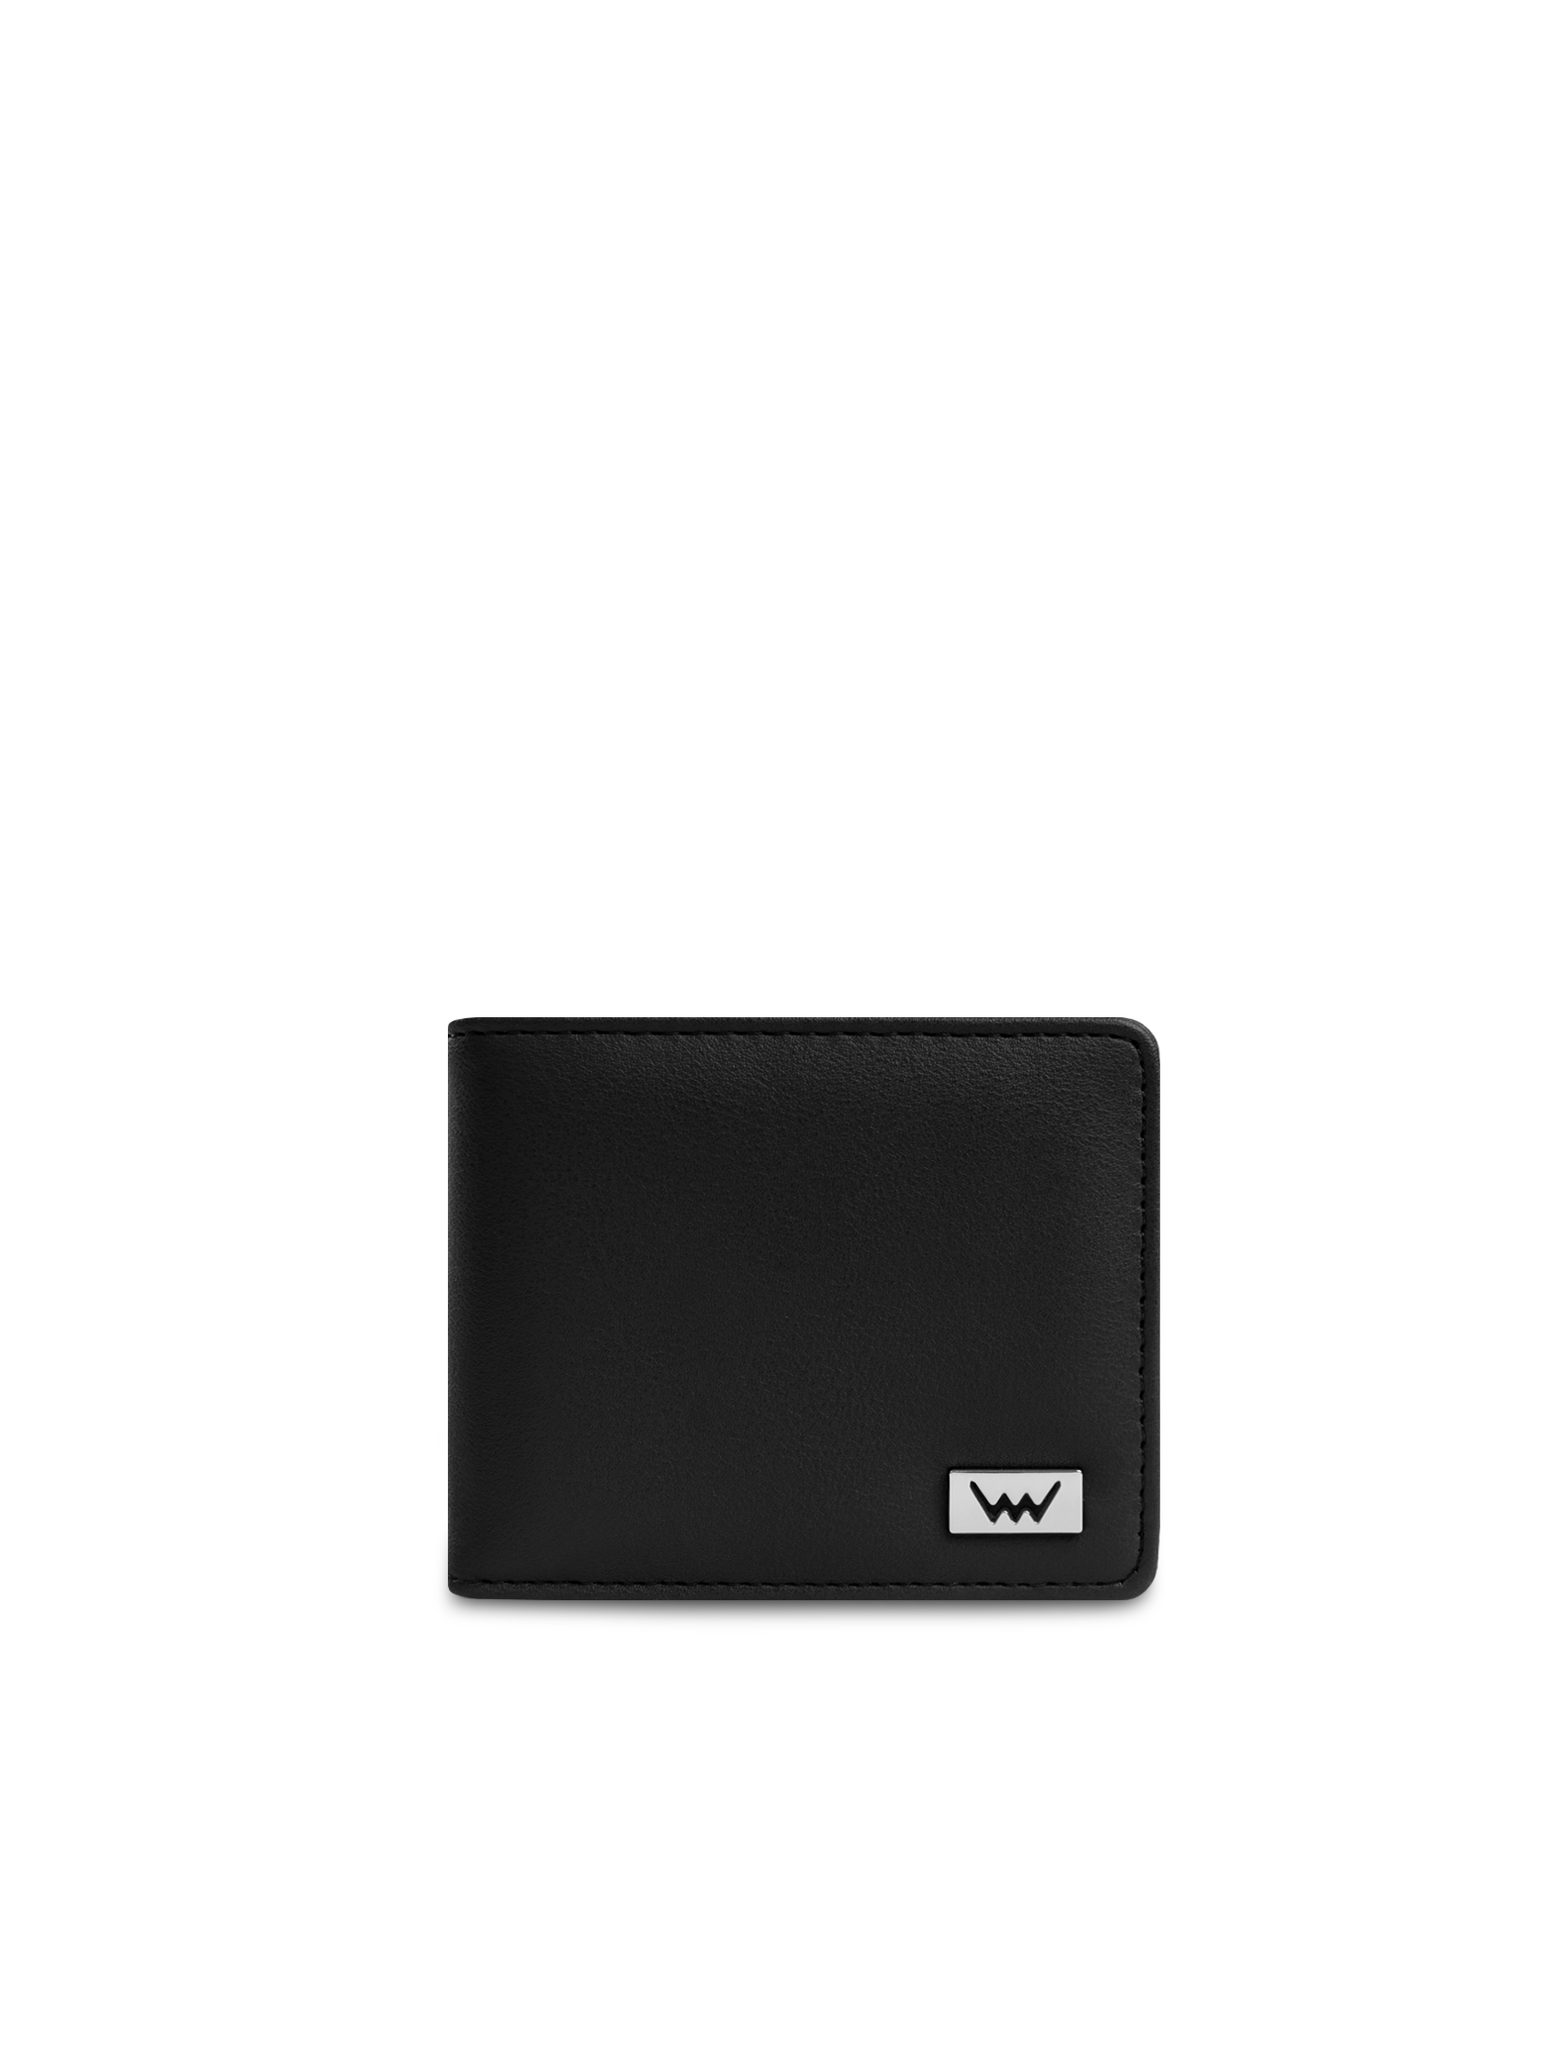 VUCH Sion Black Wallet